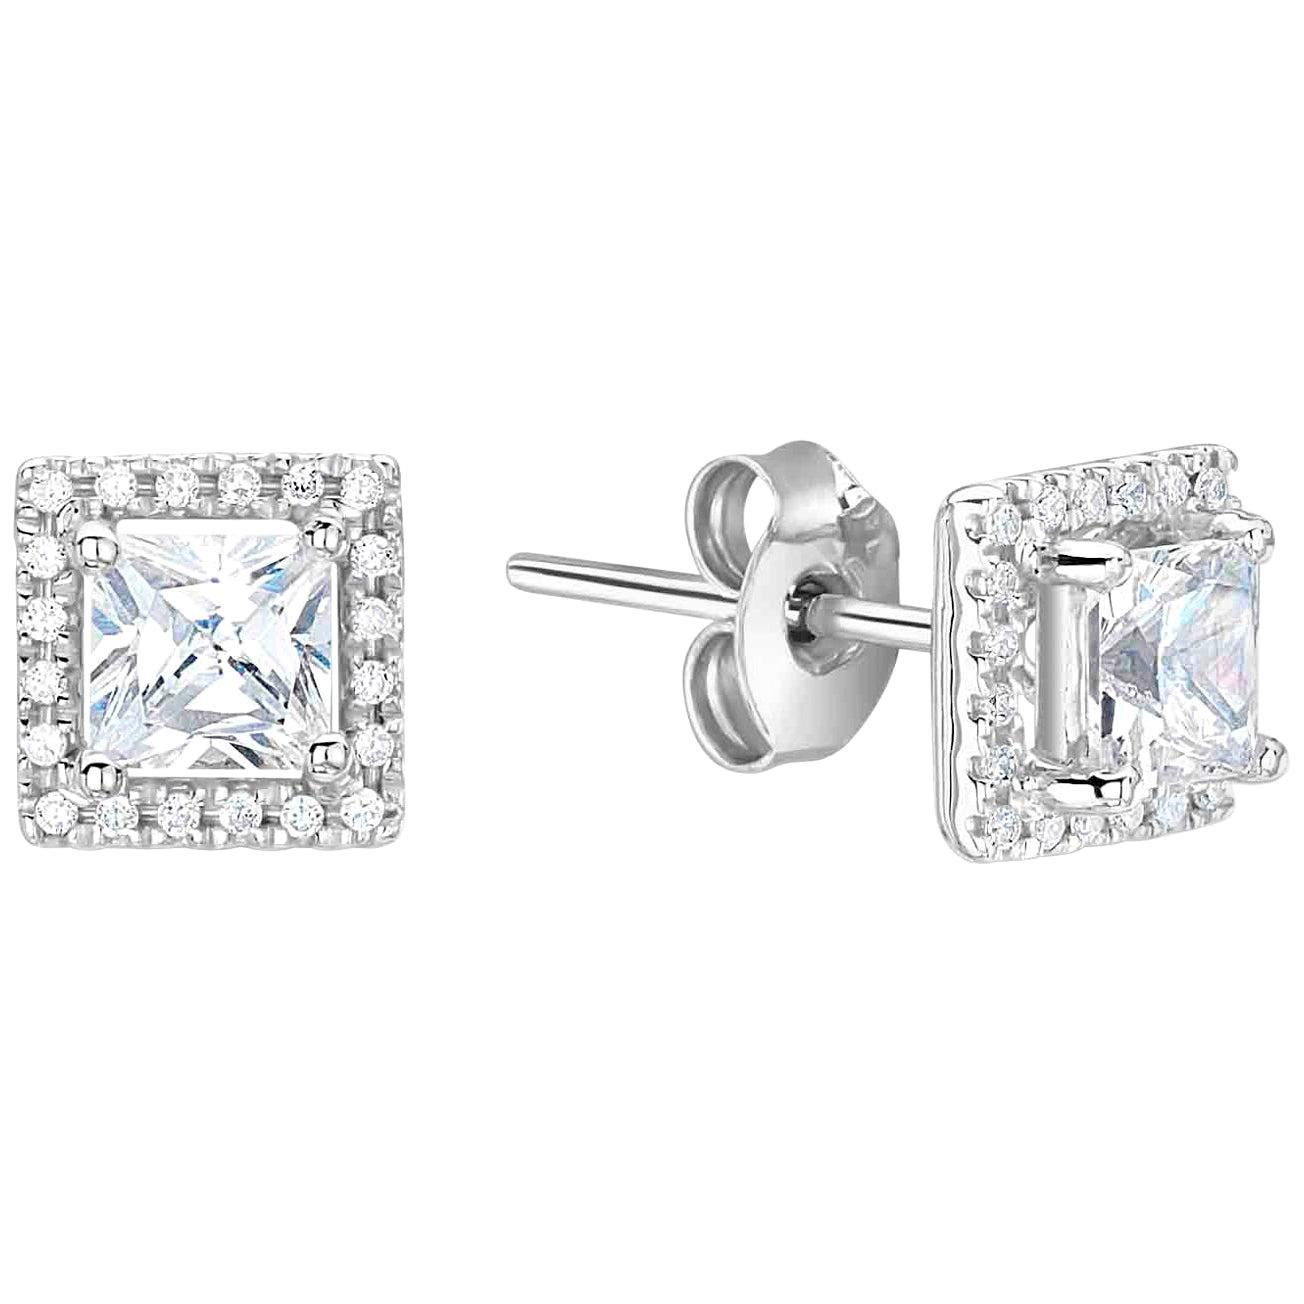 Bespoke Square Cut Diamond Halo White Gold or Platinum Stud Earrings For Sale